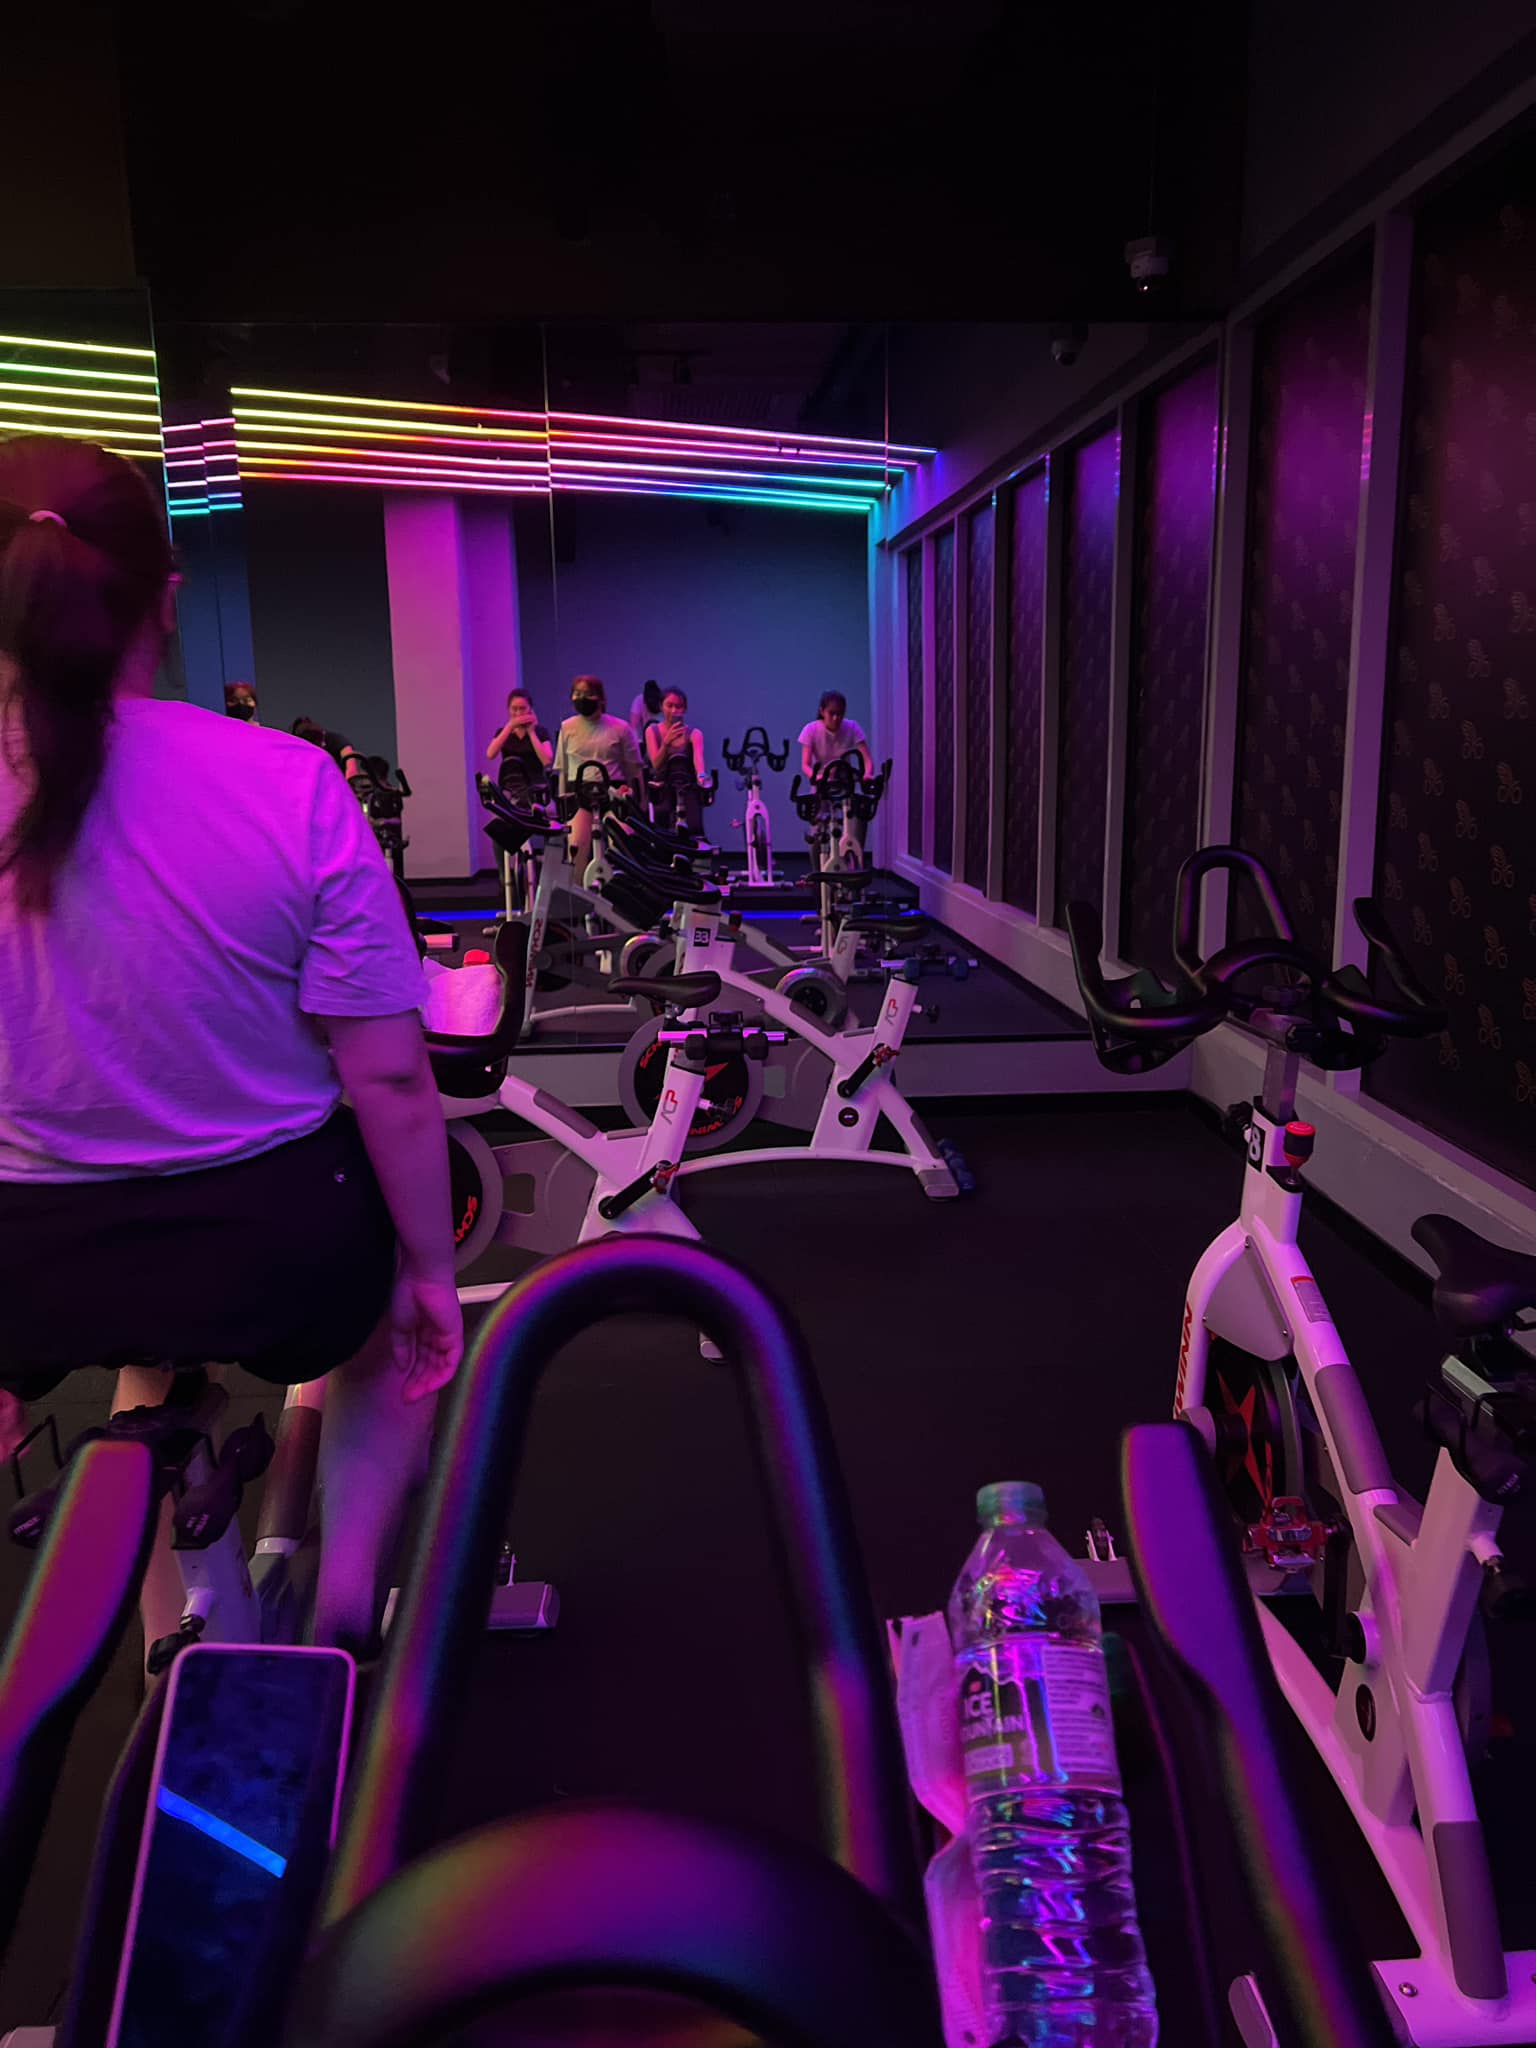 Woman lands herself in the hospital for six days after attending her first flycycle class | weirdkaya